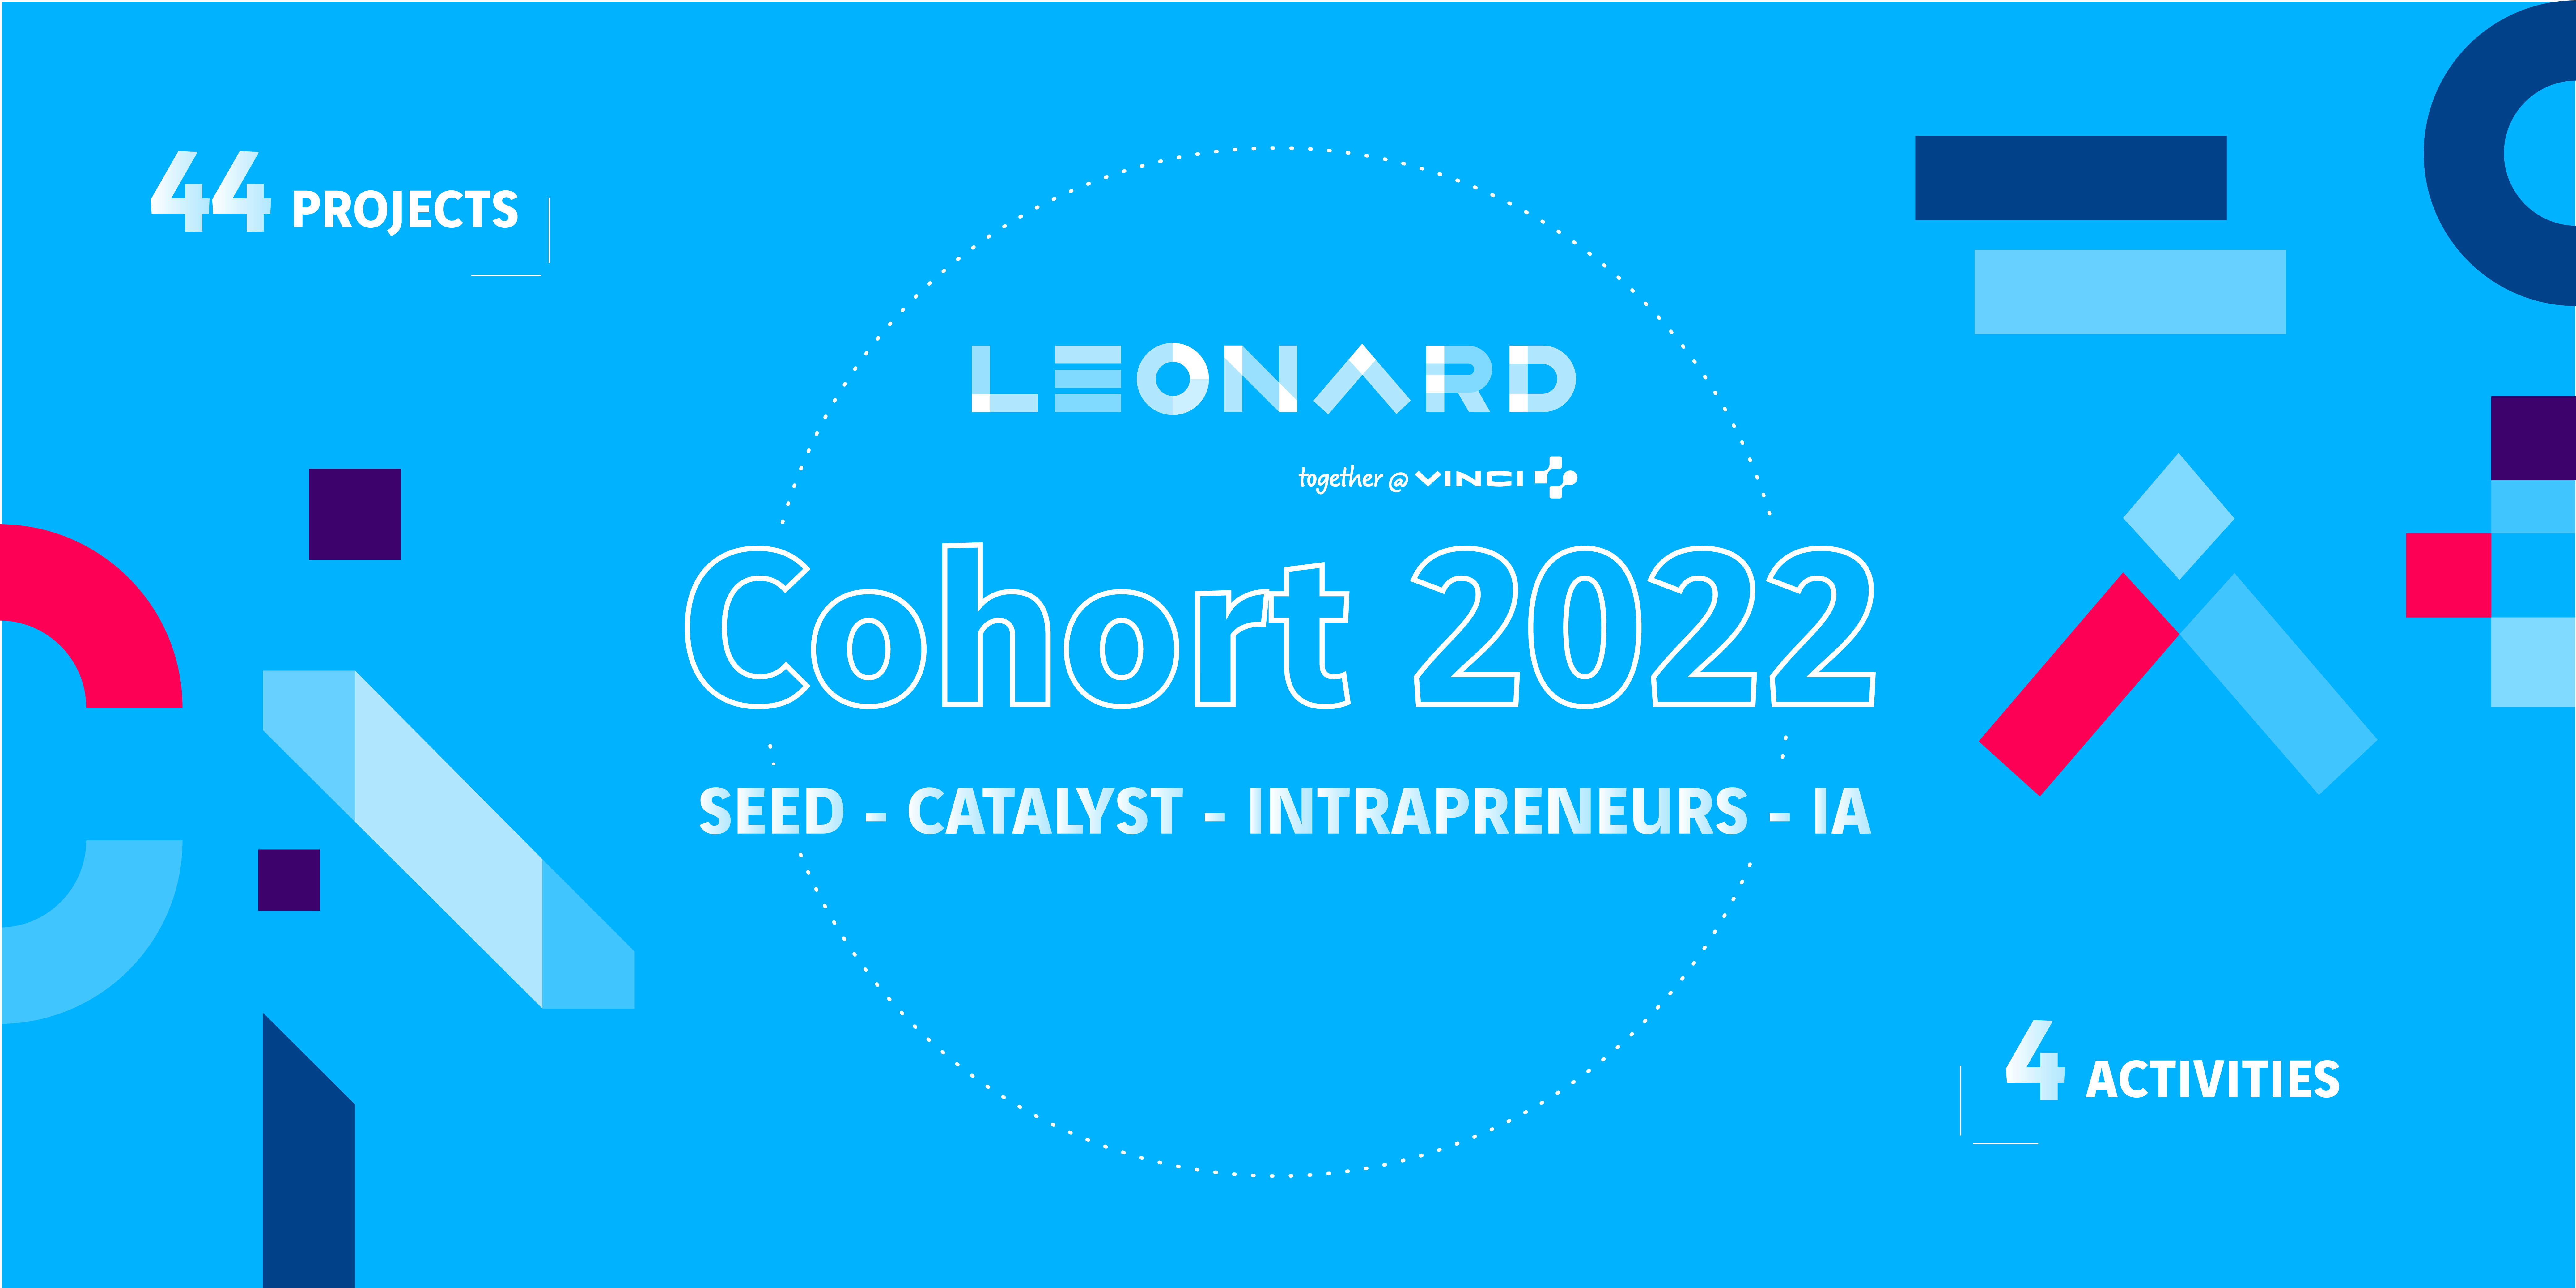 Leonard’s acceleration programs involve 44 new projects in 2022